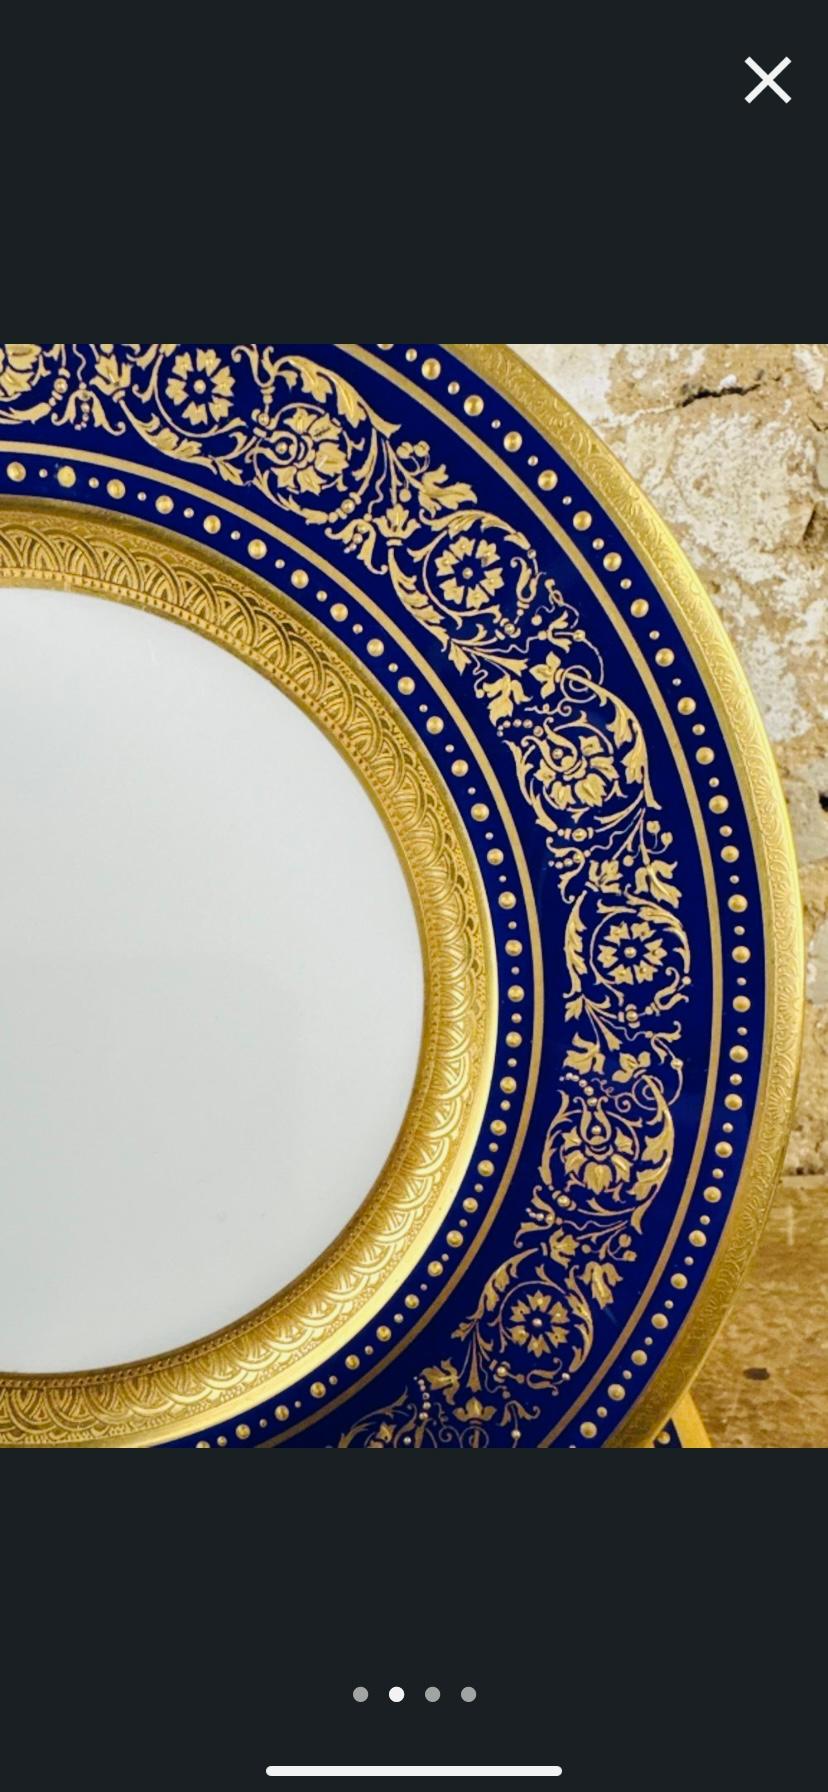 A classic and elegant set of 12 dinner plates with rich cobalt blue collars elaborately decorated in gold in a beaded foliate swag surrounded by two 24 karat gold bands. A nice clear center for food service made with crisp white porcelain. Made by